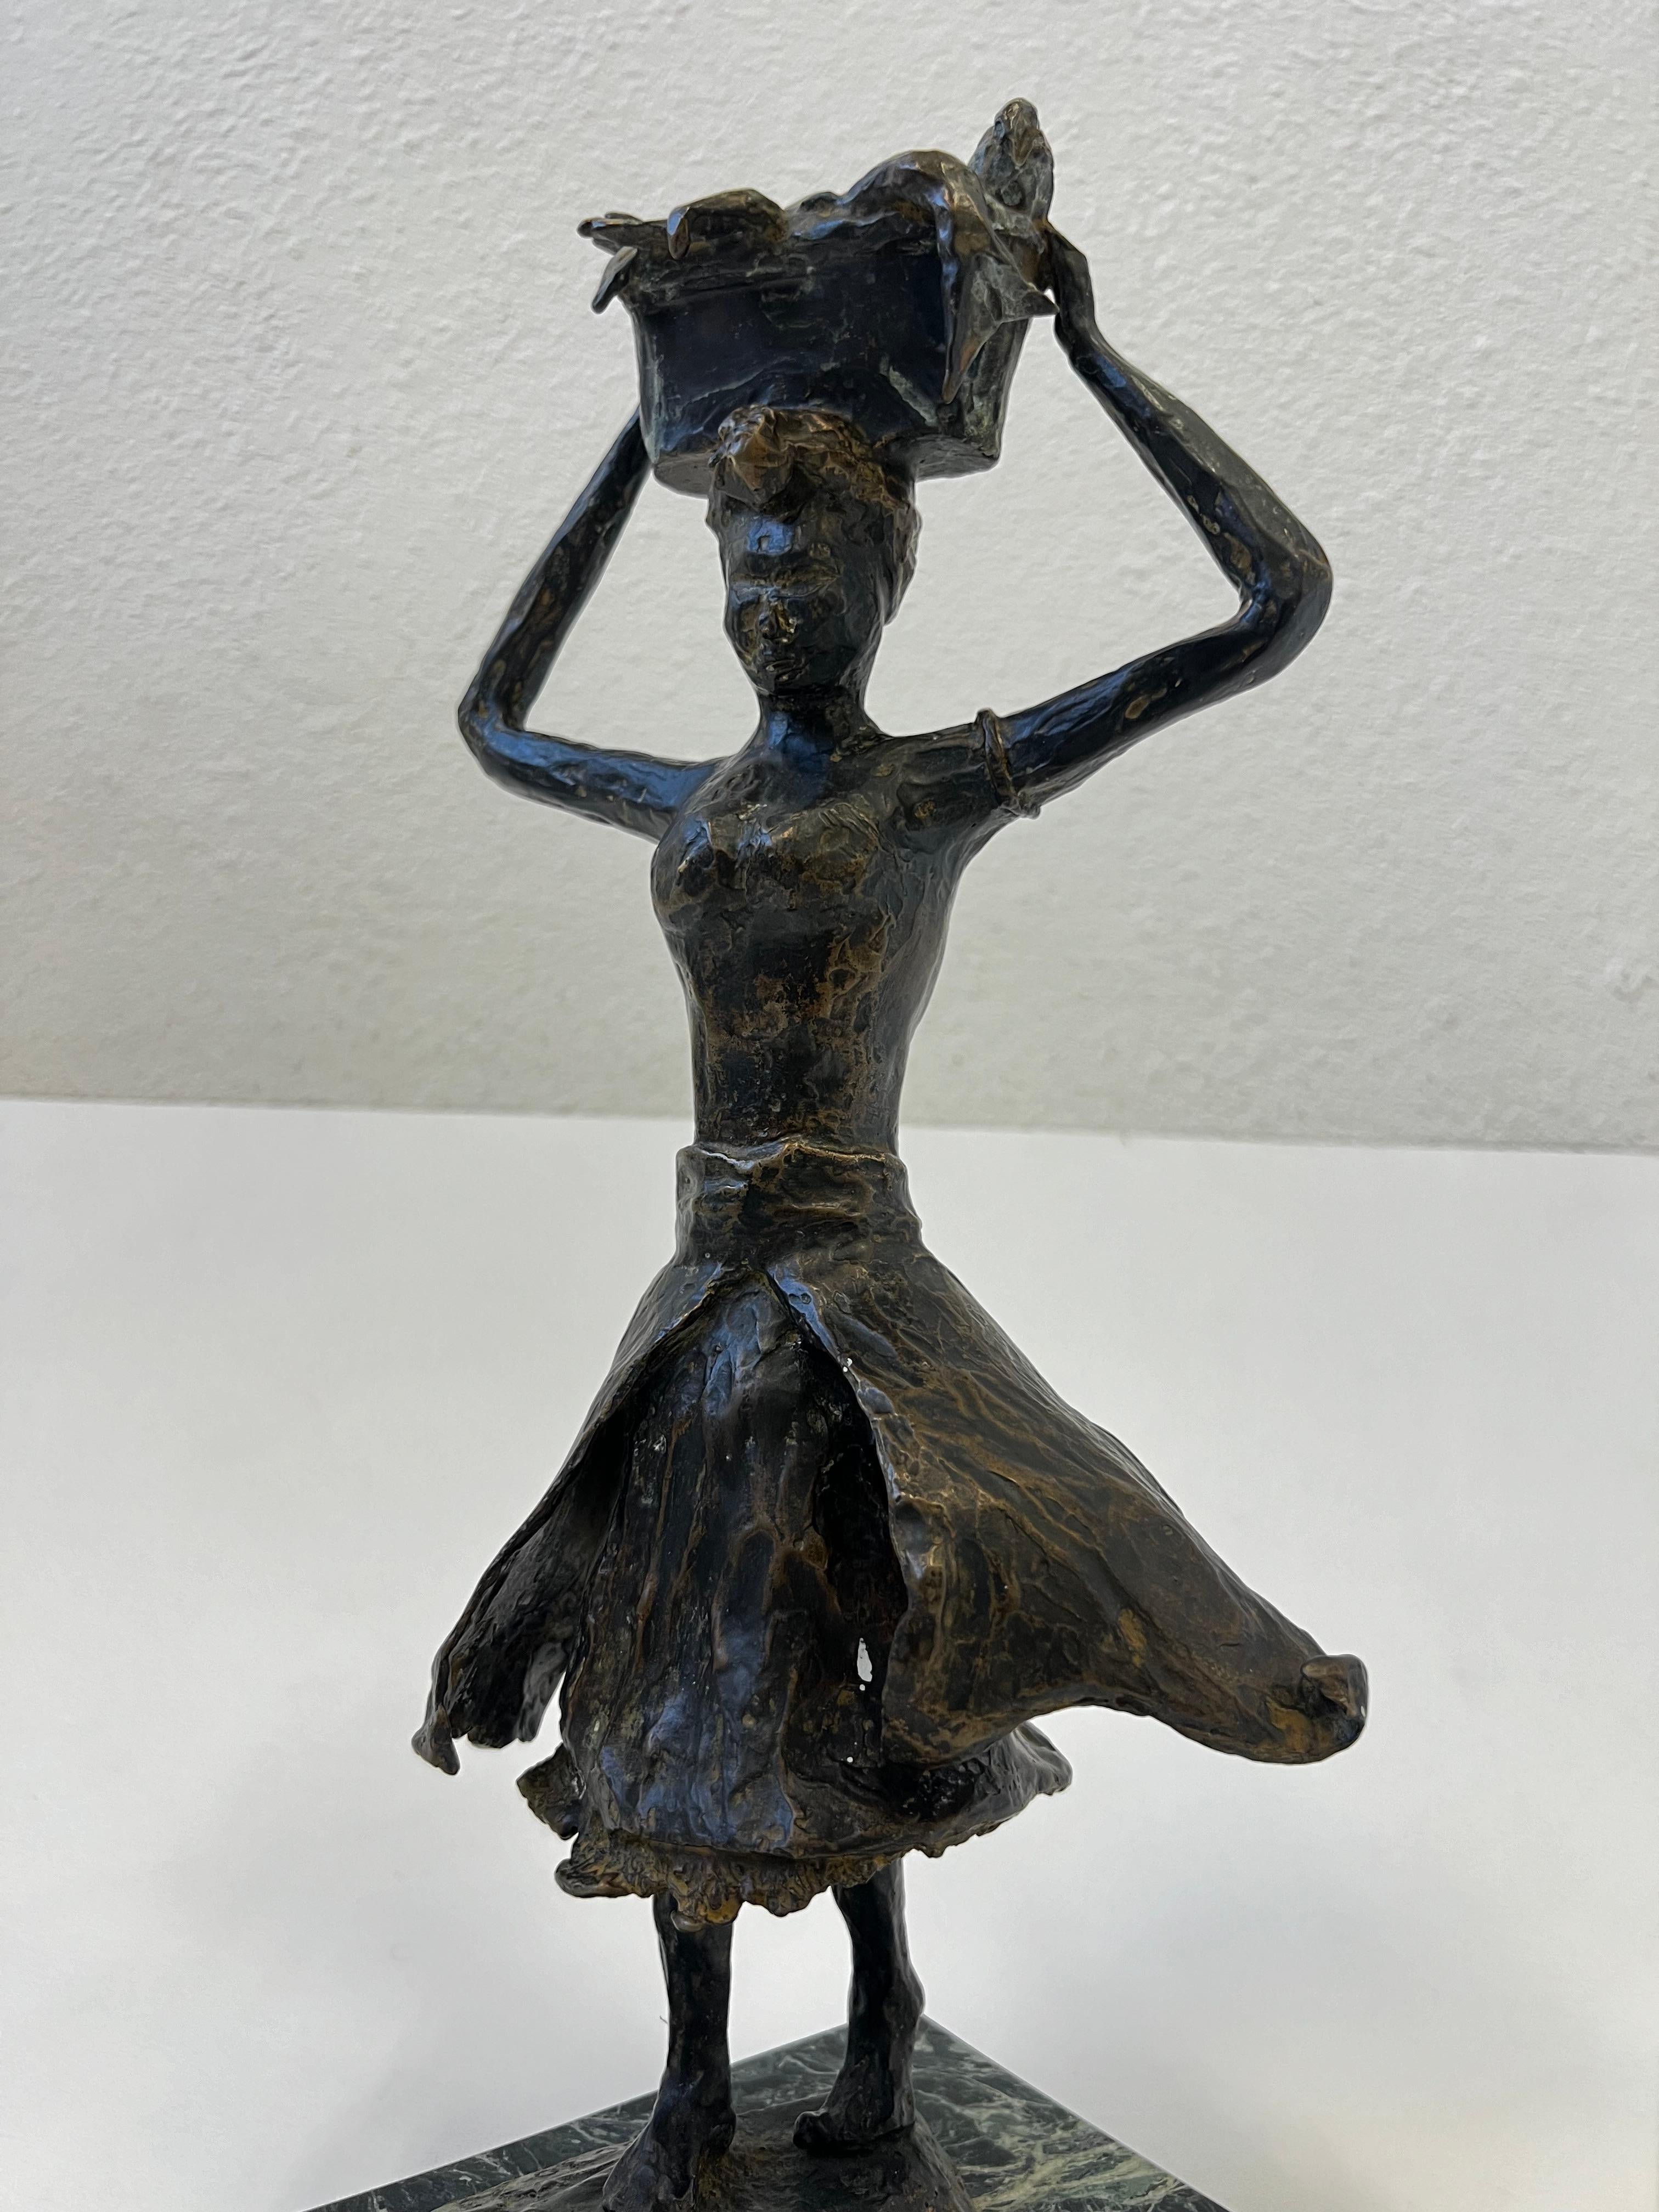 Beautiful 1973 Spanish cast bronze sculpture depicting a woman walking with a basket of fish on her head. 
Marked W.N. Cardobo 73 (see detail photo). 
In original beautiful condition. 

Measurements: 15” High 6.75” Deep, 6.25” Wide. 
Base is 6.75”